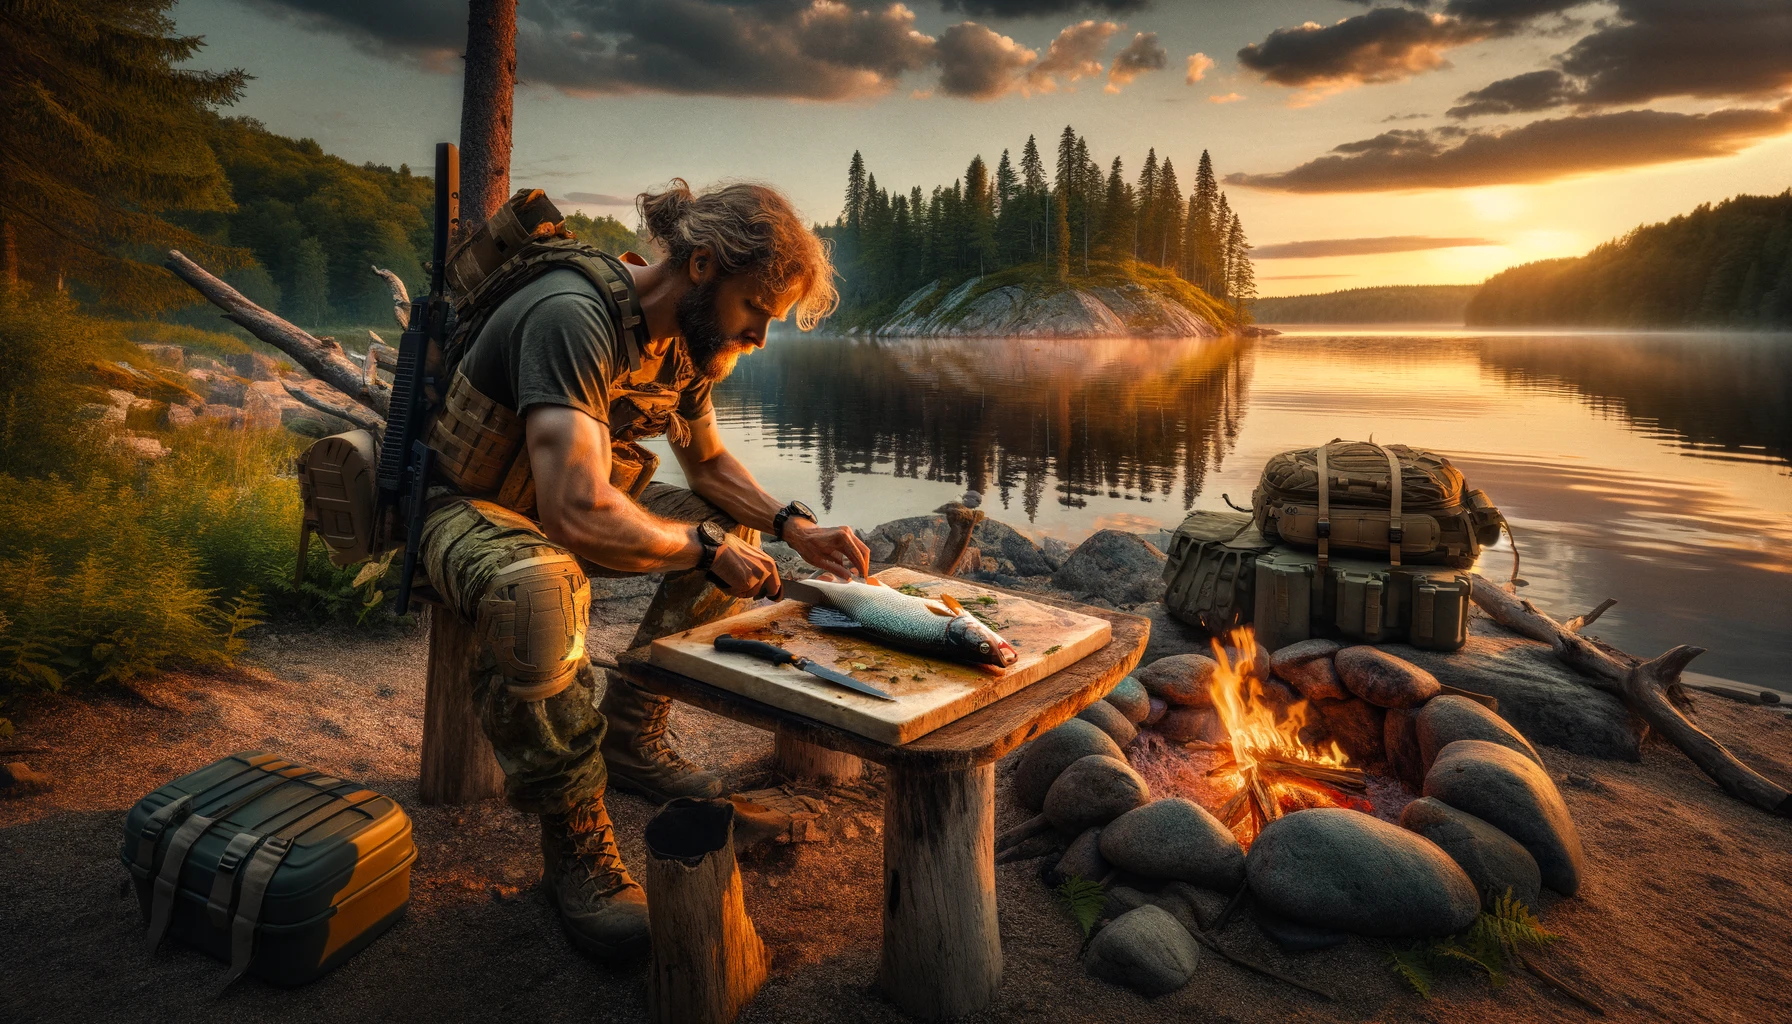 Prepper preparing and cooking a freshly caught fish by a serene lakeside at sunset, using a fire pit and flat stone, showcasing survival skills and the primal connection with nature, in a peaceful yet adventurous wilderness setting